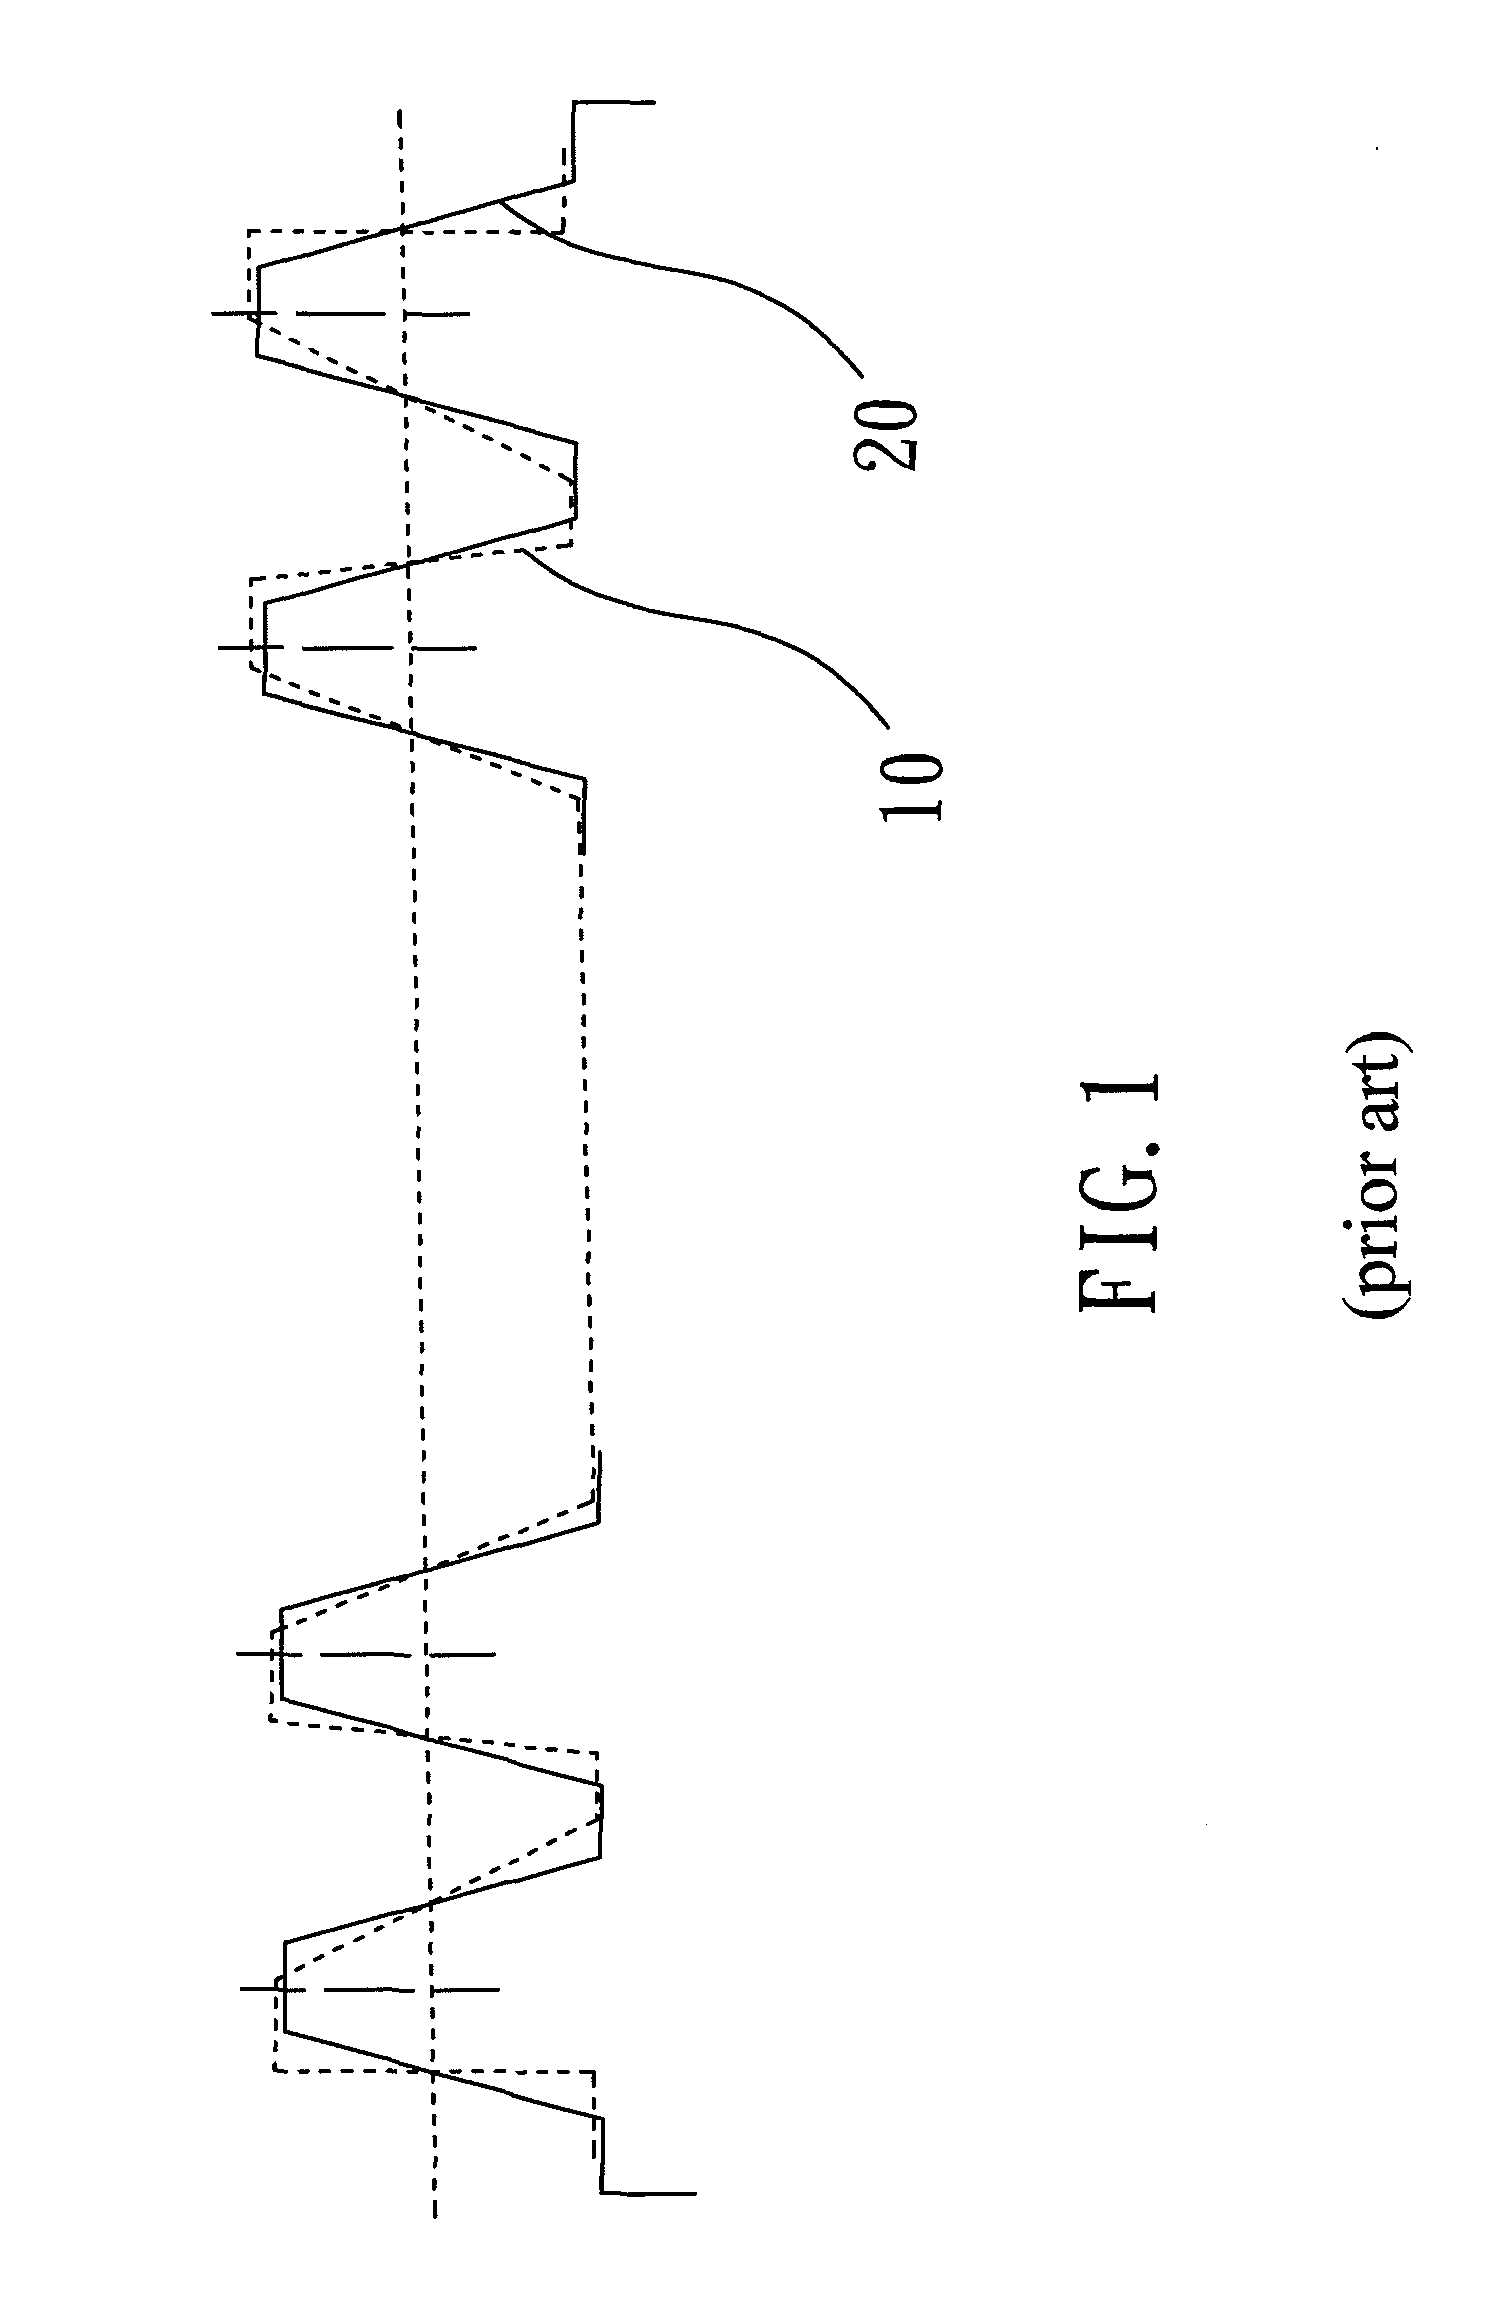 Variable-Tooth-Thickness Worm-Type Tool and Method For Using The Same To Fabricate Gears